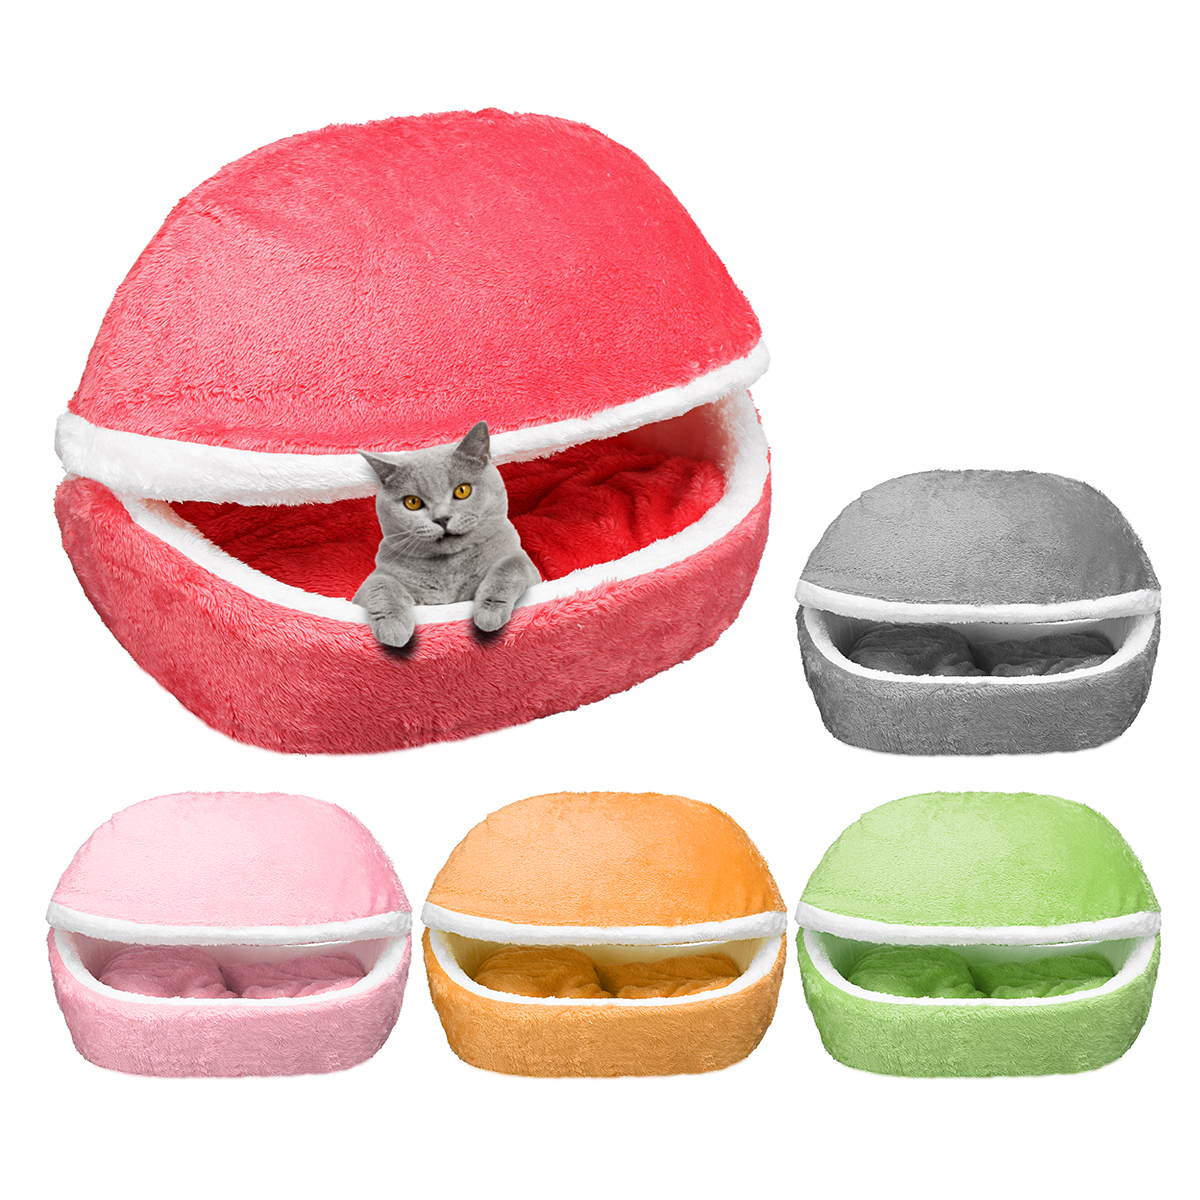 

Removable Pet House Yurt Puppy Kennel Dog Cat Sleeping Bed Home Animals Mat